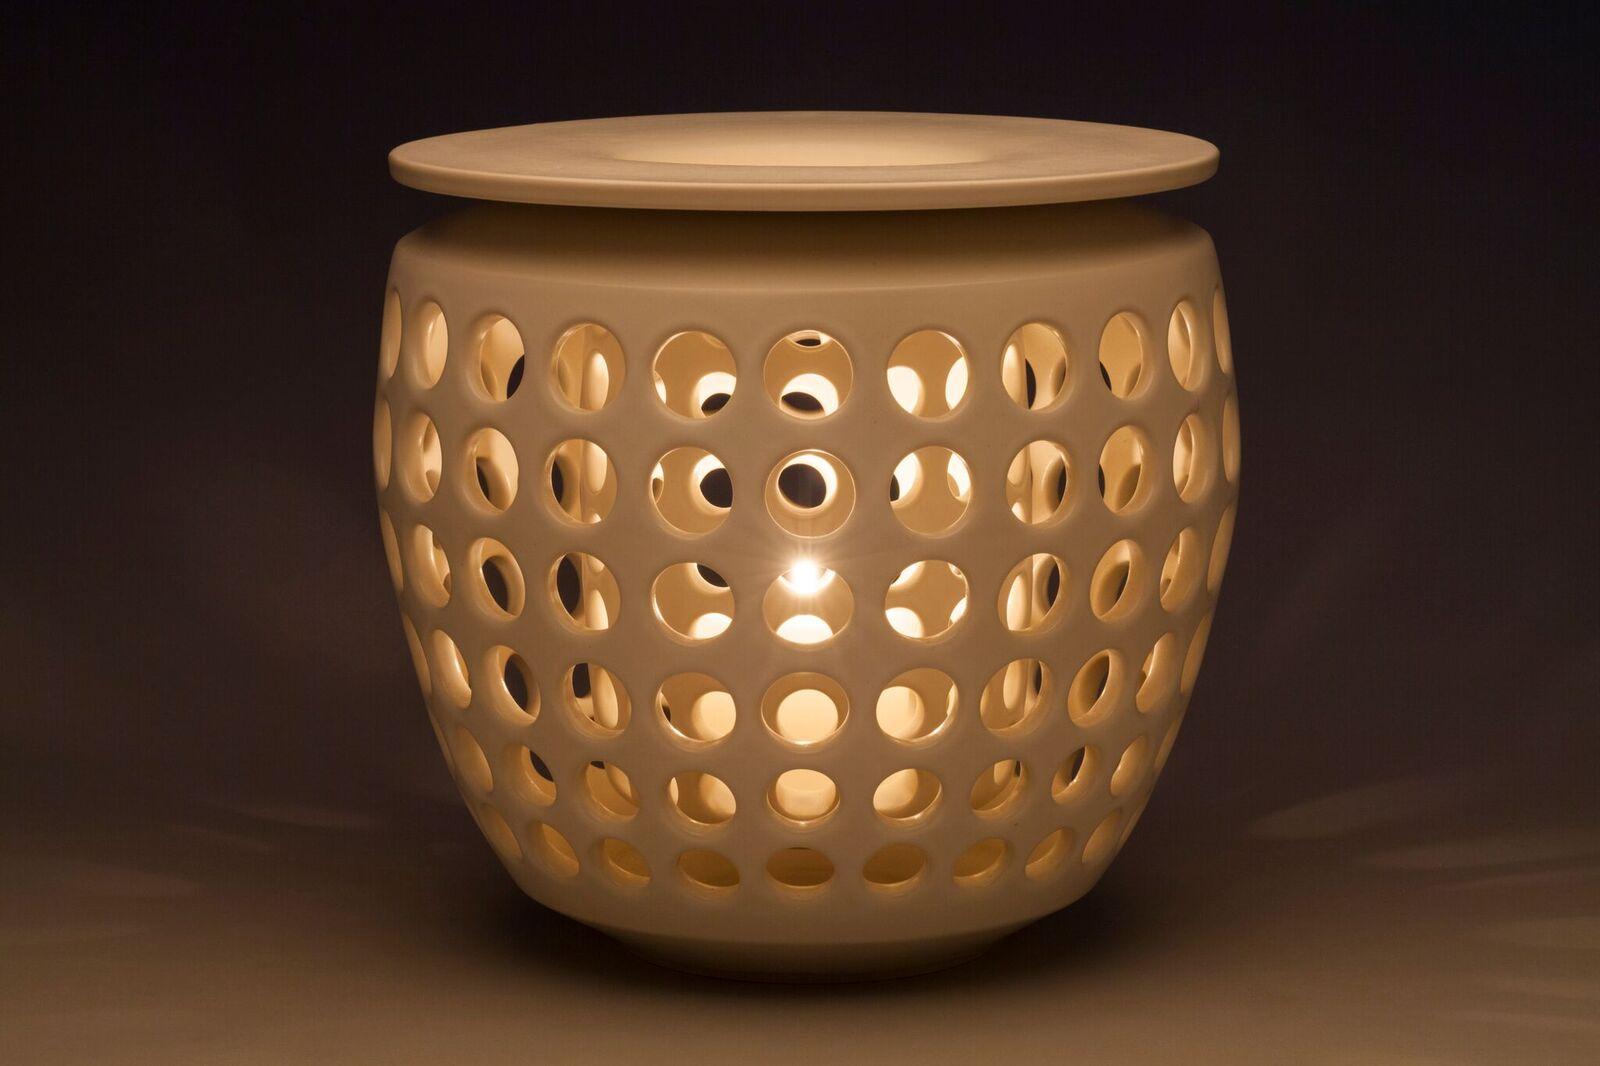 Inspired by Mid-Century Modern design, this unique candleholder is made in two pieces. A pierced outer shell holds a removable pierced insert. Both pieces wheel thrown and hand pierced white stoneware with a white satin glaze. Small holes are